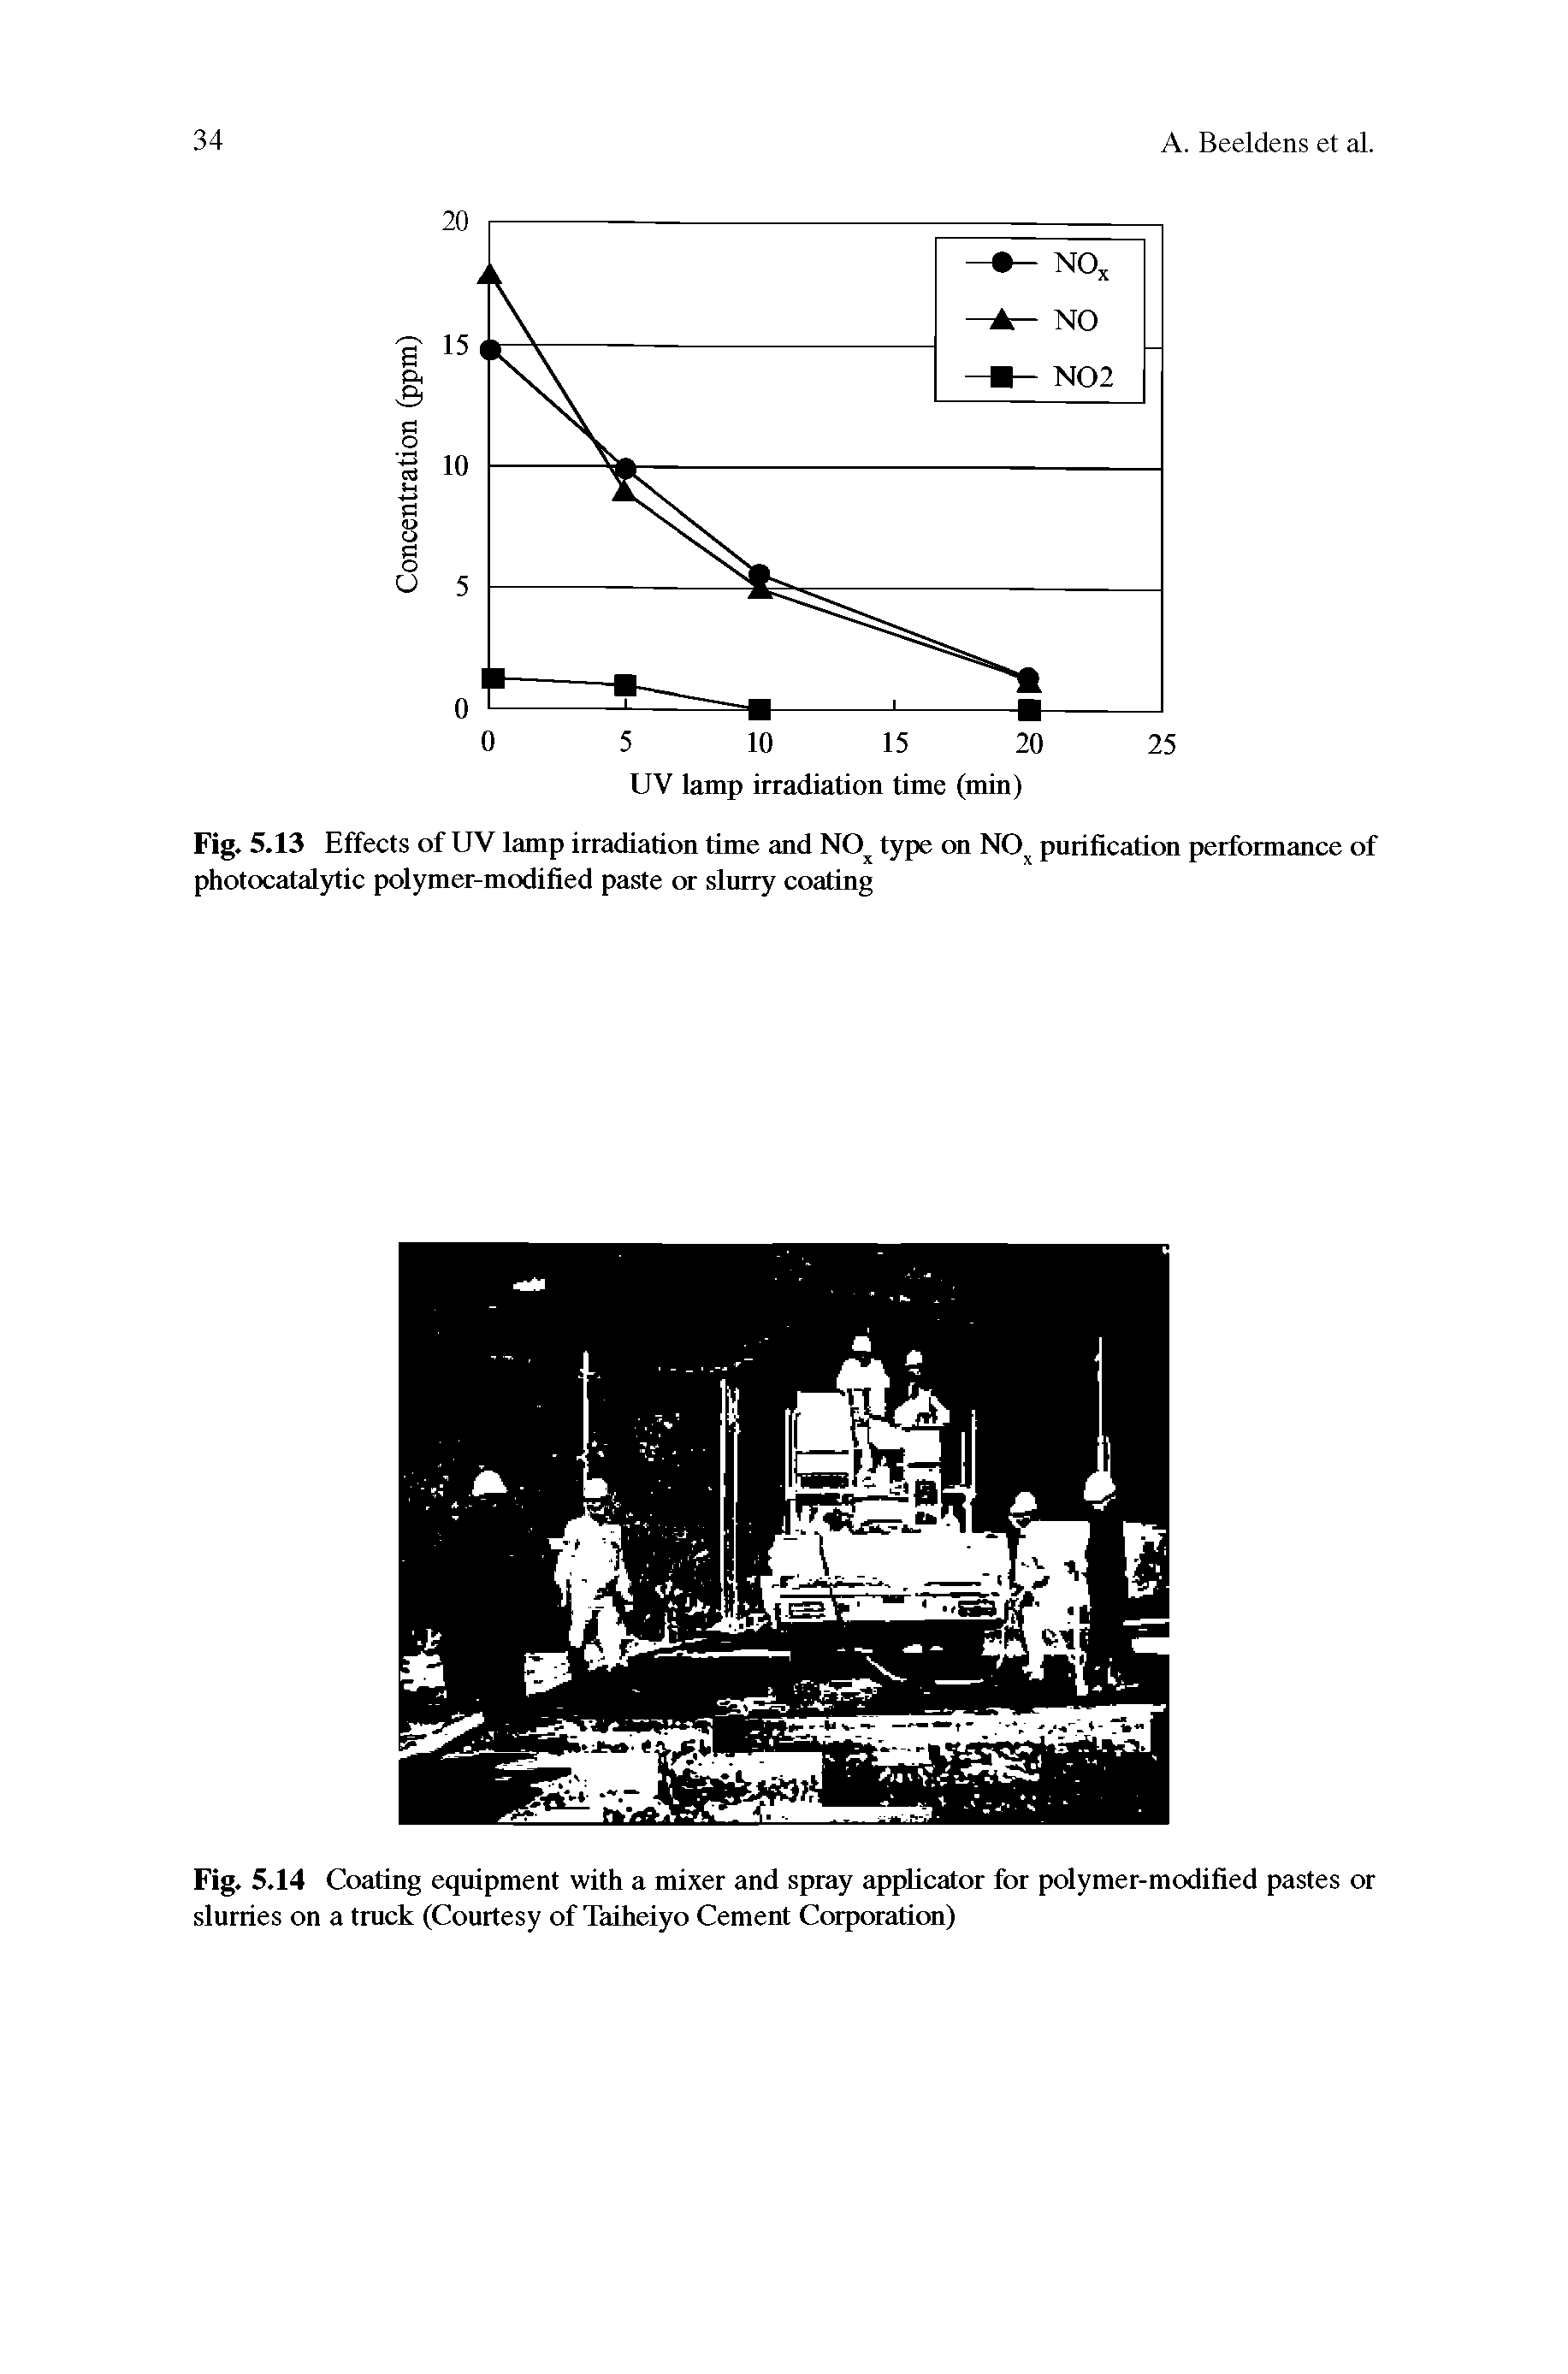 Fig. 5.14 Coating equipment with a mixer and spray applicator for polymer-modified pastes or slurries on a truck (Courtesy of Taiheiyo Cement Corporation)...